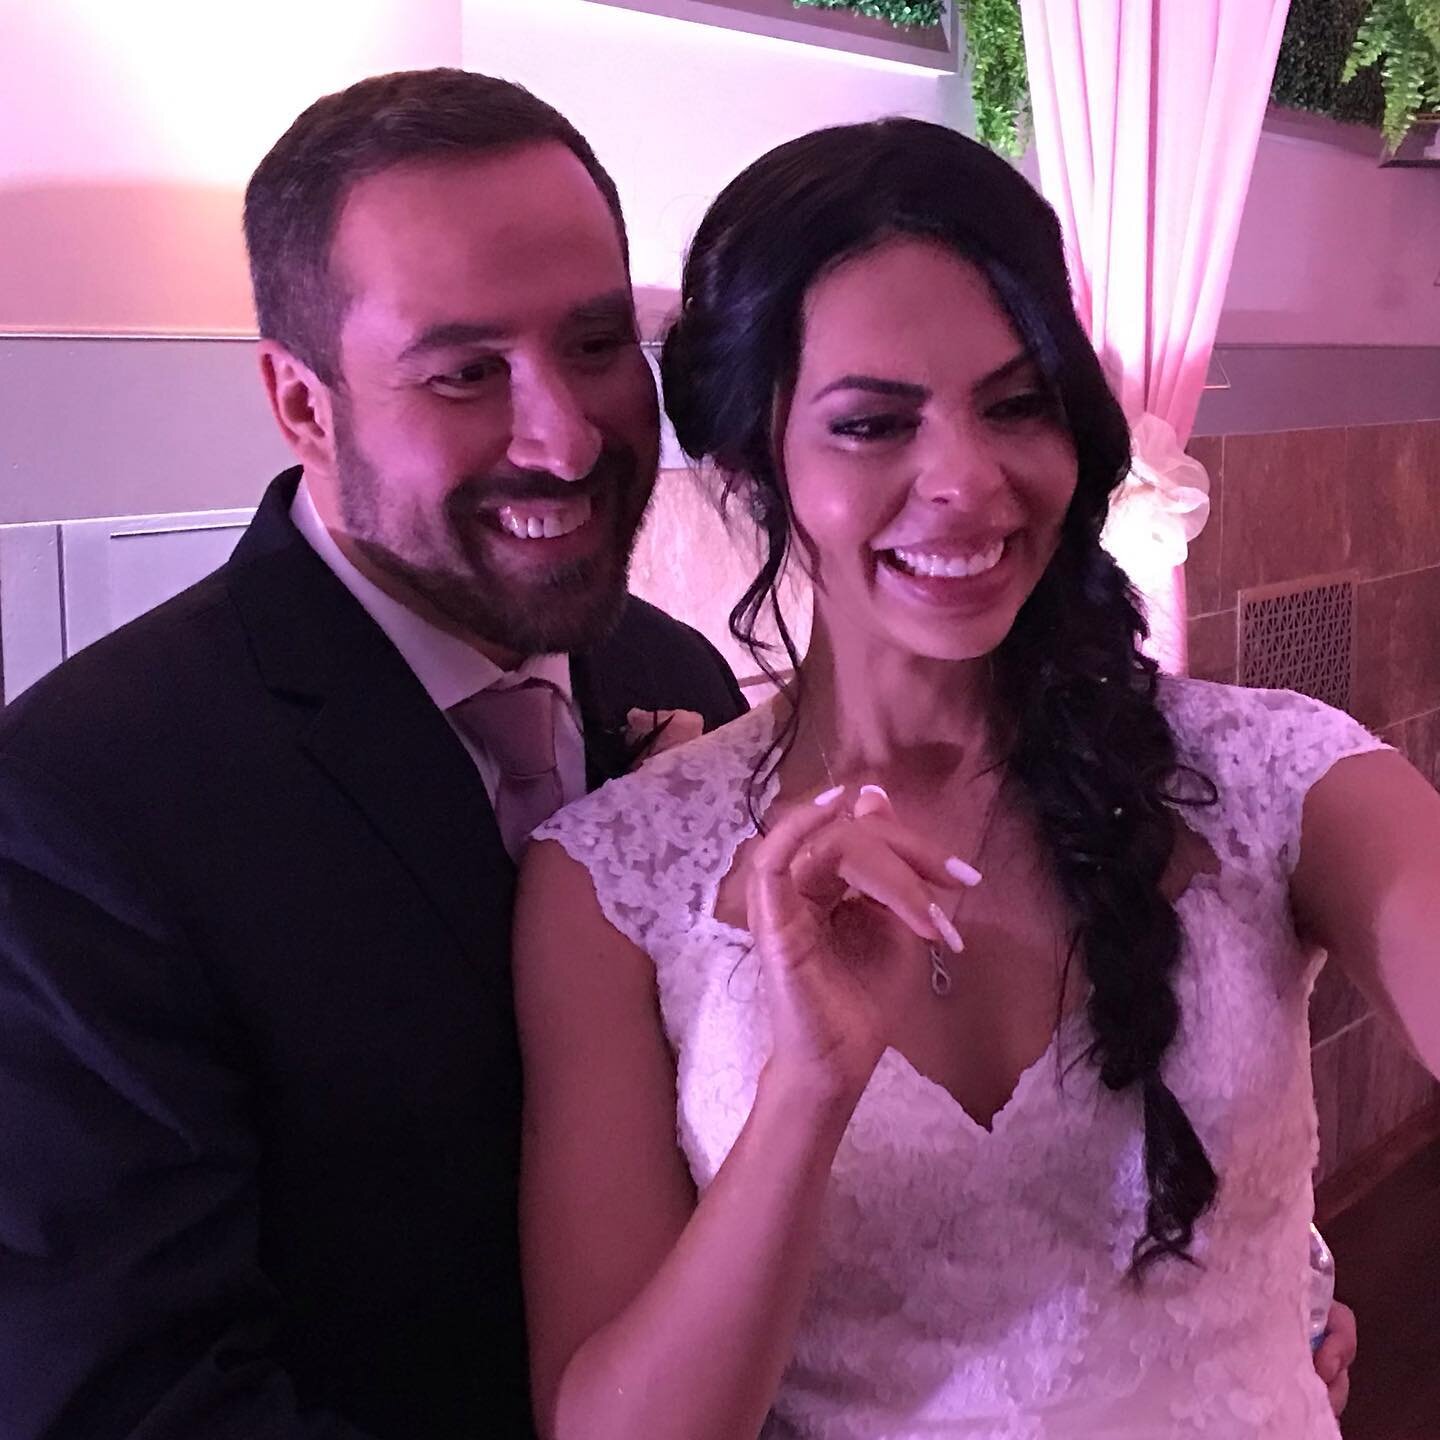 Congrats to Christopher &amp; Monique Pena! I was so blessed to be a part of capturing their special day. Running our live video switcher I provided video coverage of the wedding and reception with 3 cameras, for her family who were out of the countr